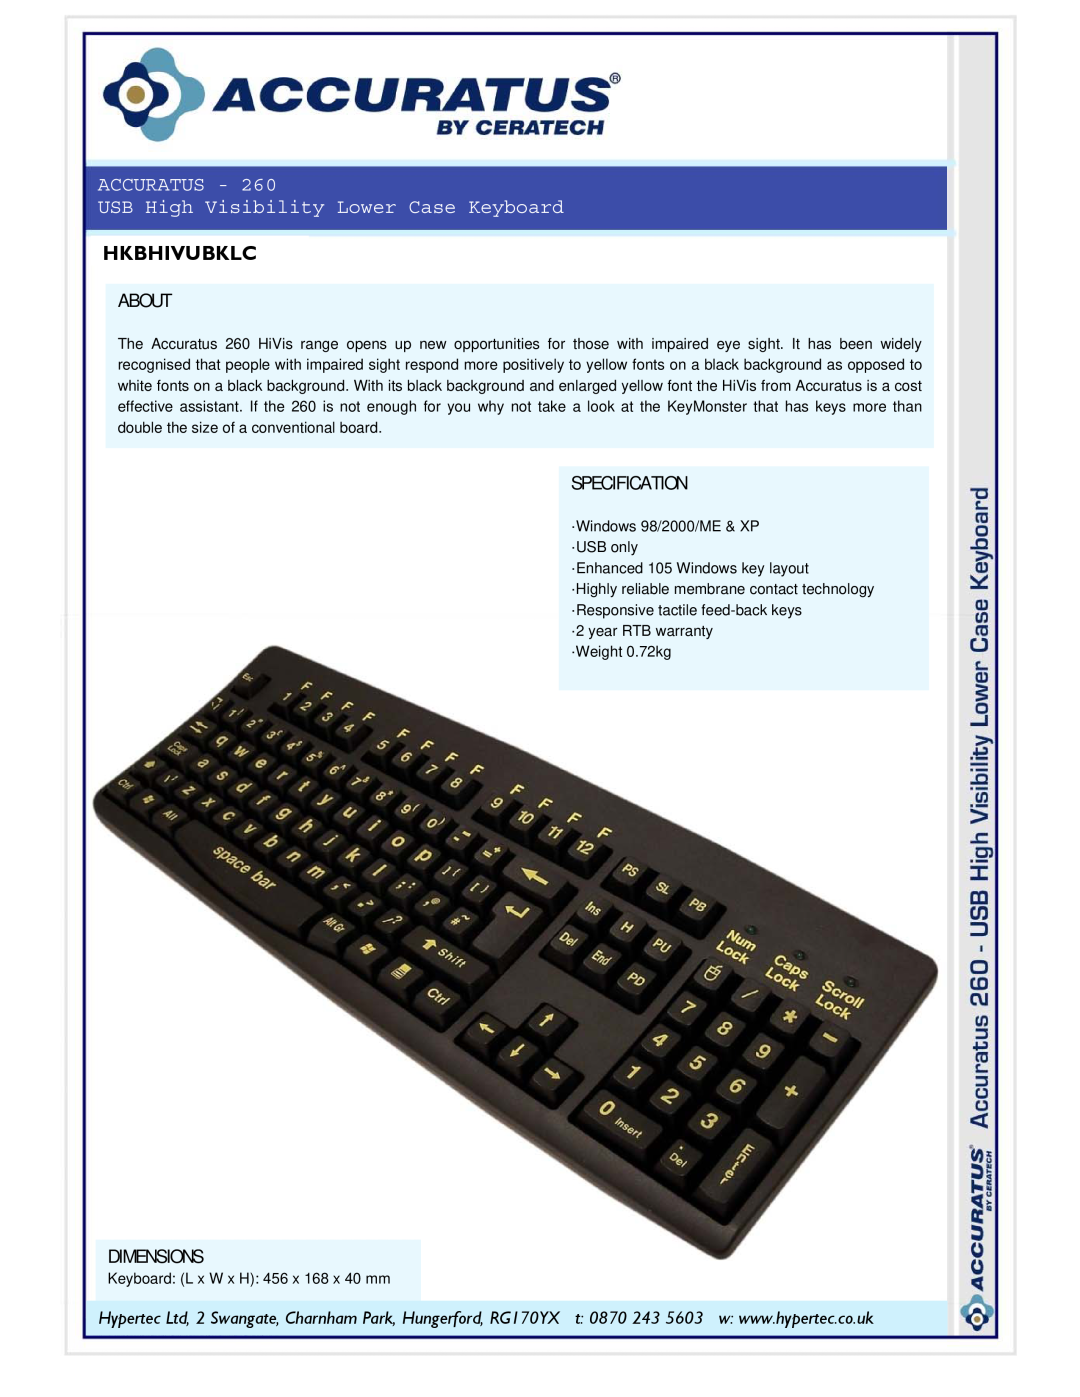 Hypertec 260 dimensions ACCURATUS USB High Visibility Lower Case Keyboard, Hkbhivubklc, About, Specification, Dimensions 